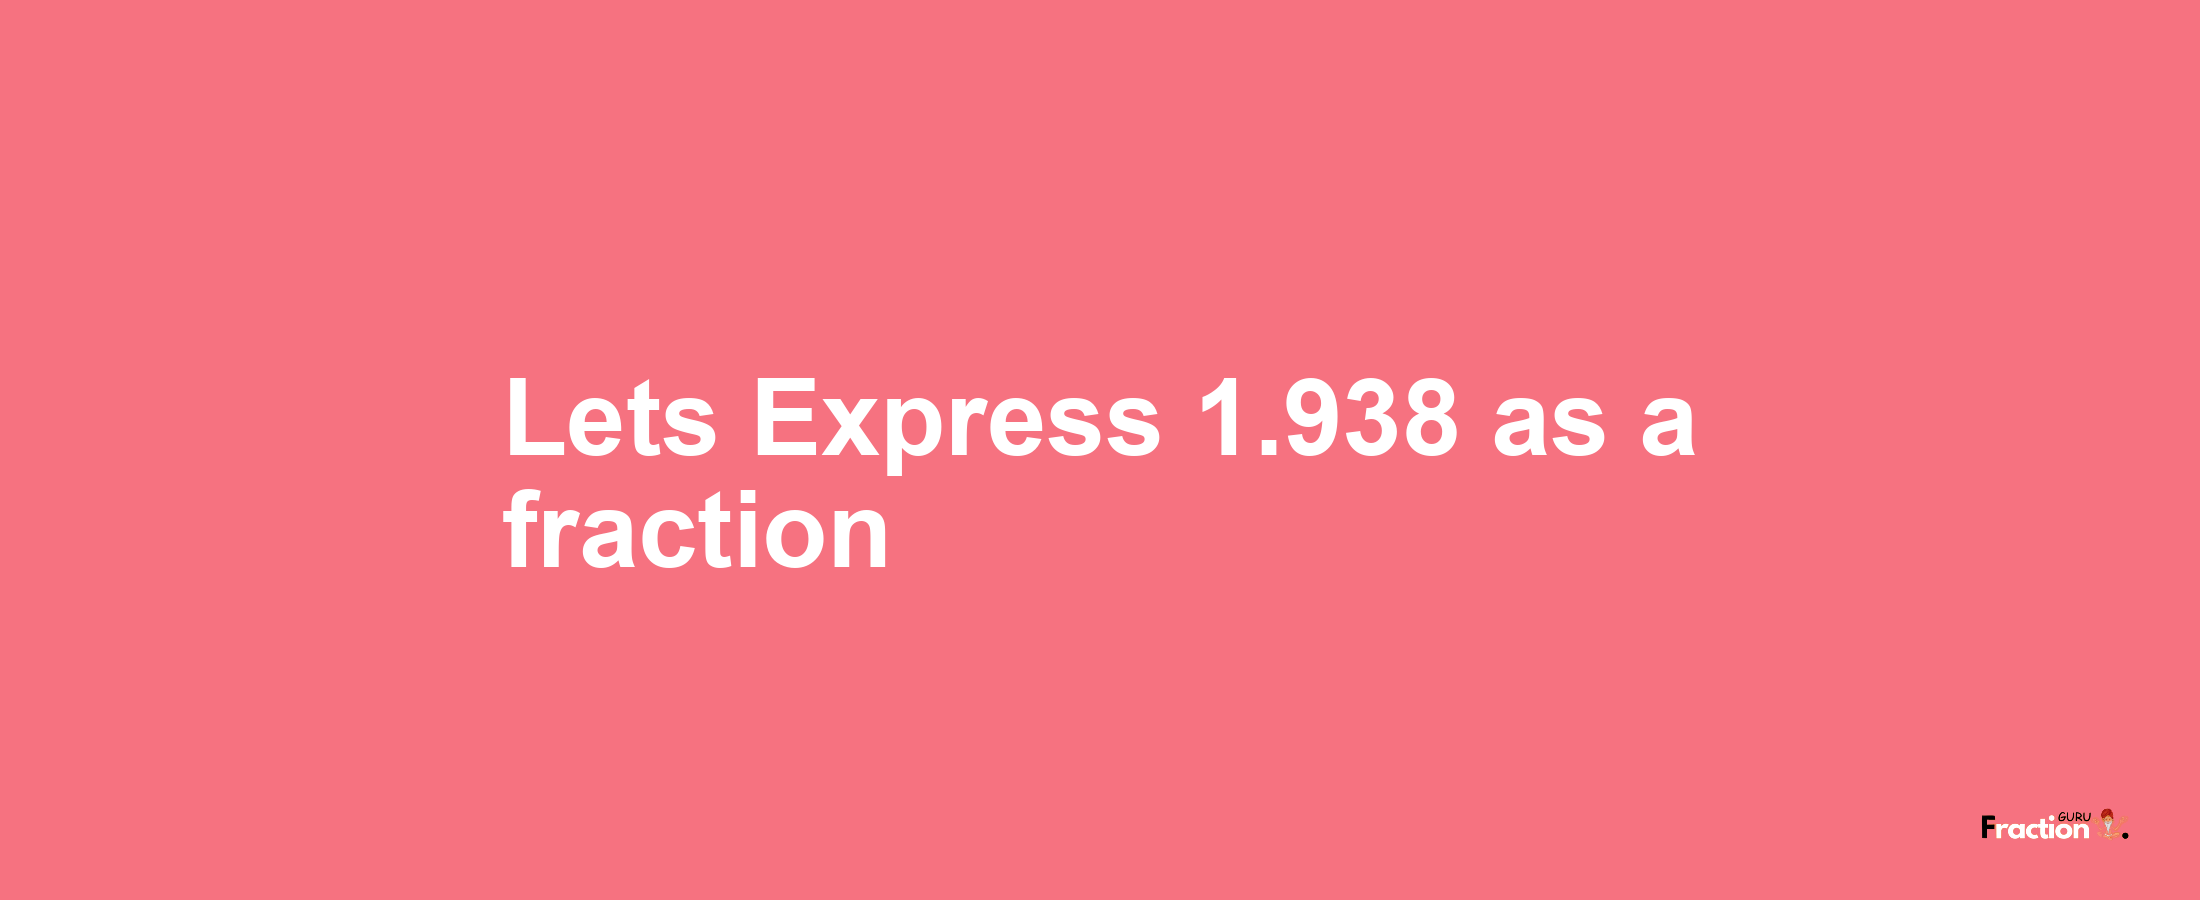 Lets Express 1.938 as afraction